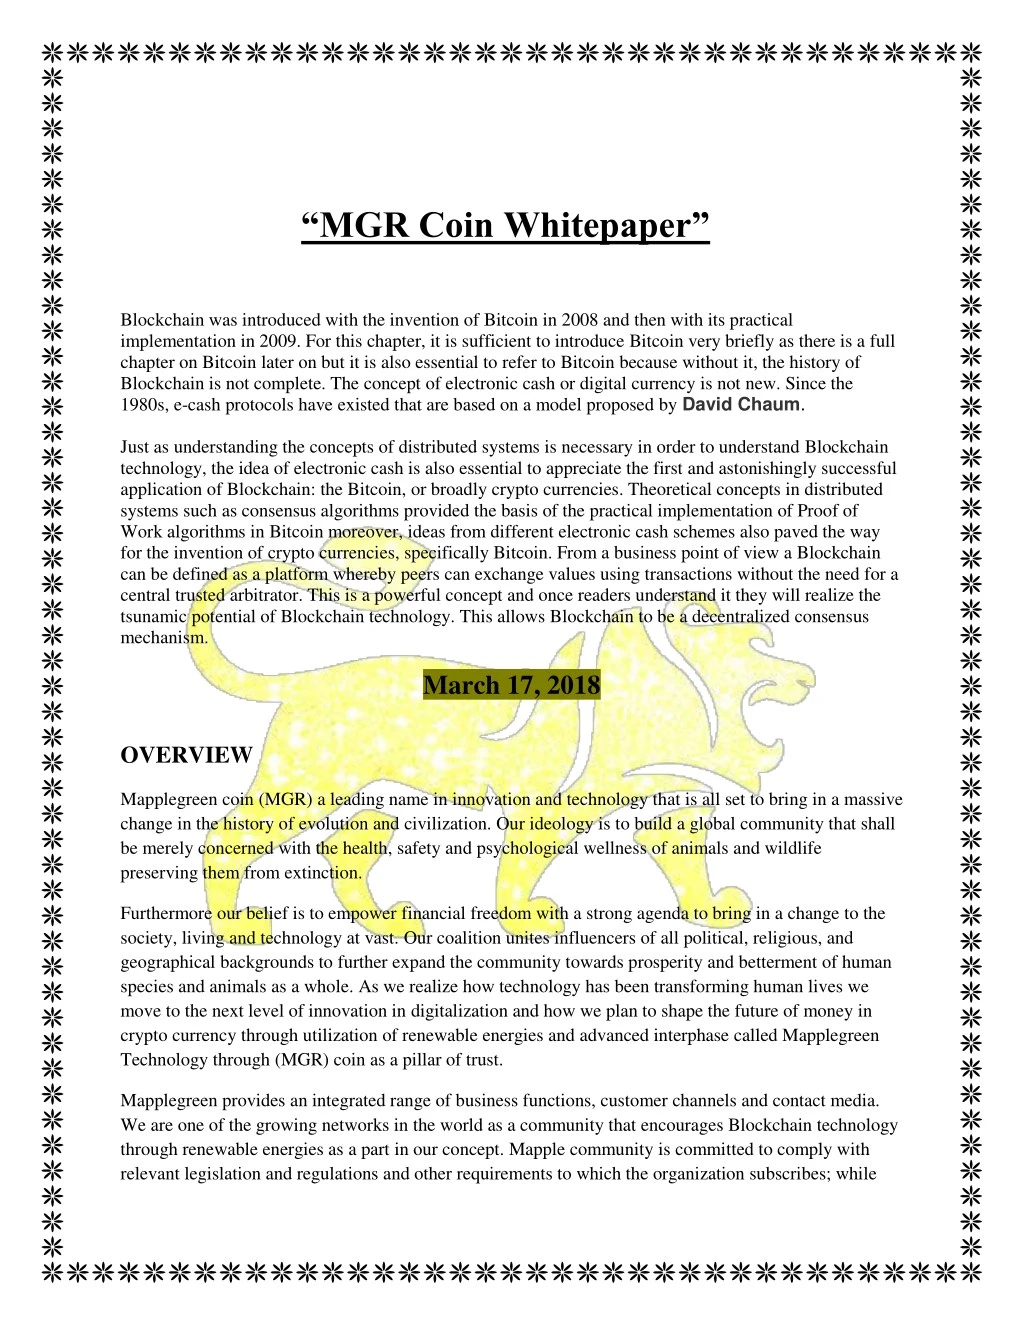 mgr coin whitepaper